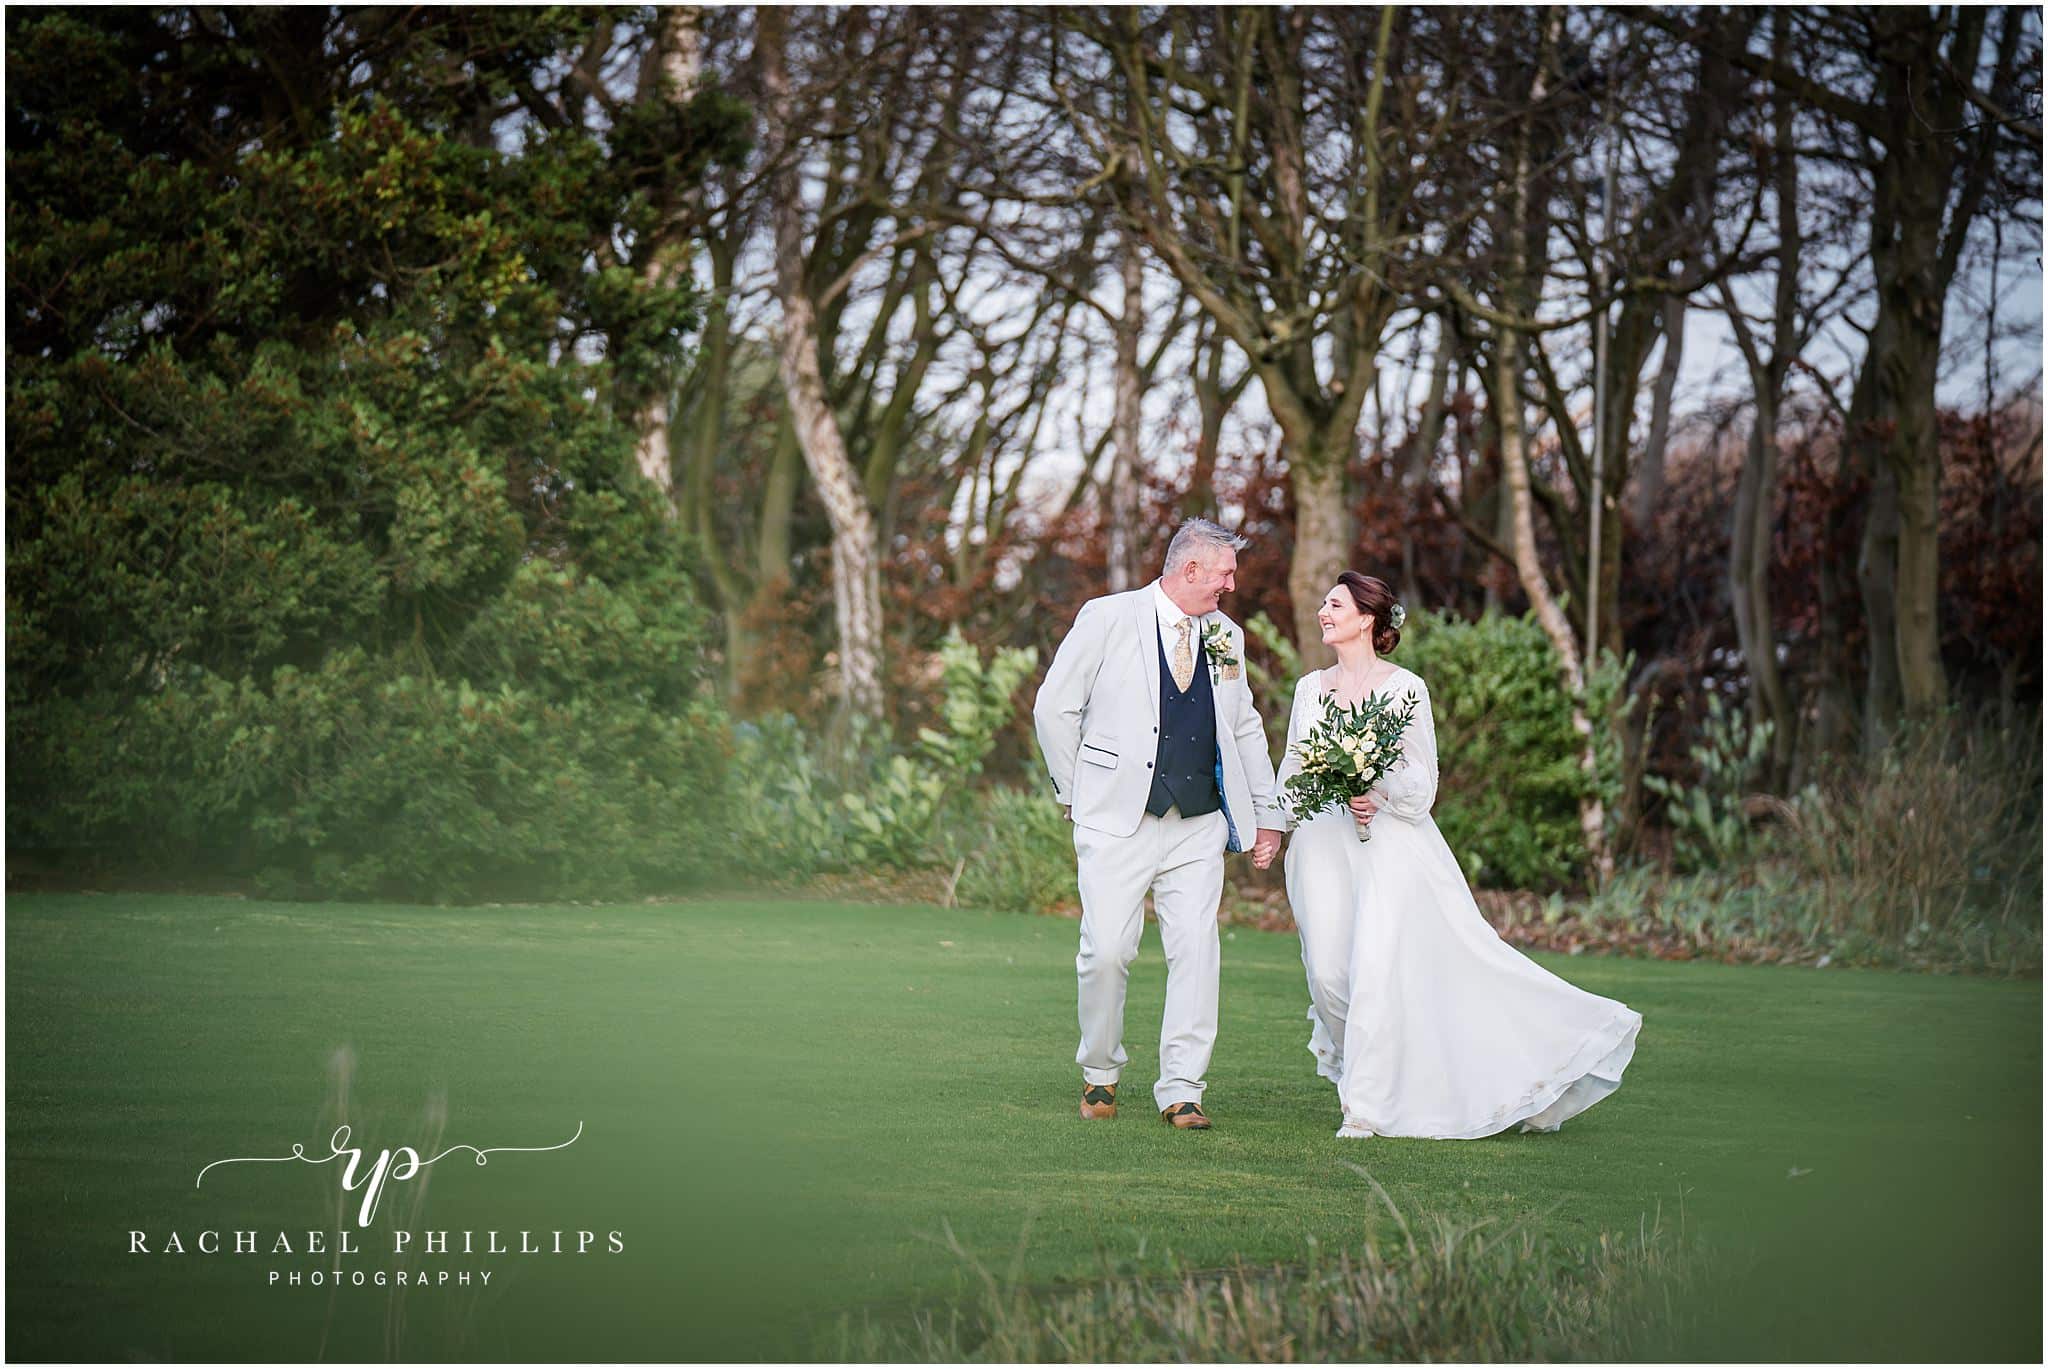 Bride and groom on there wedding day in the gardens together at Cockliffe country house in nottingham, photo by rachael phillips photography